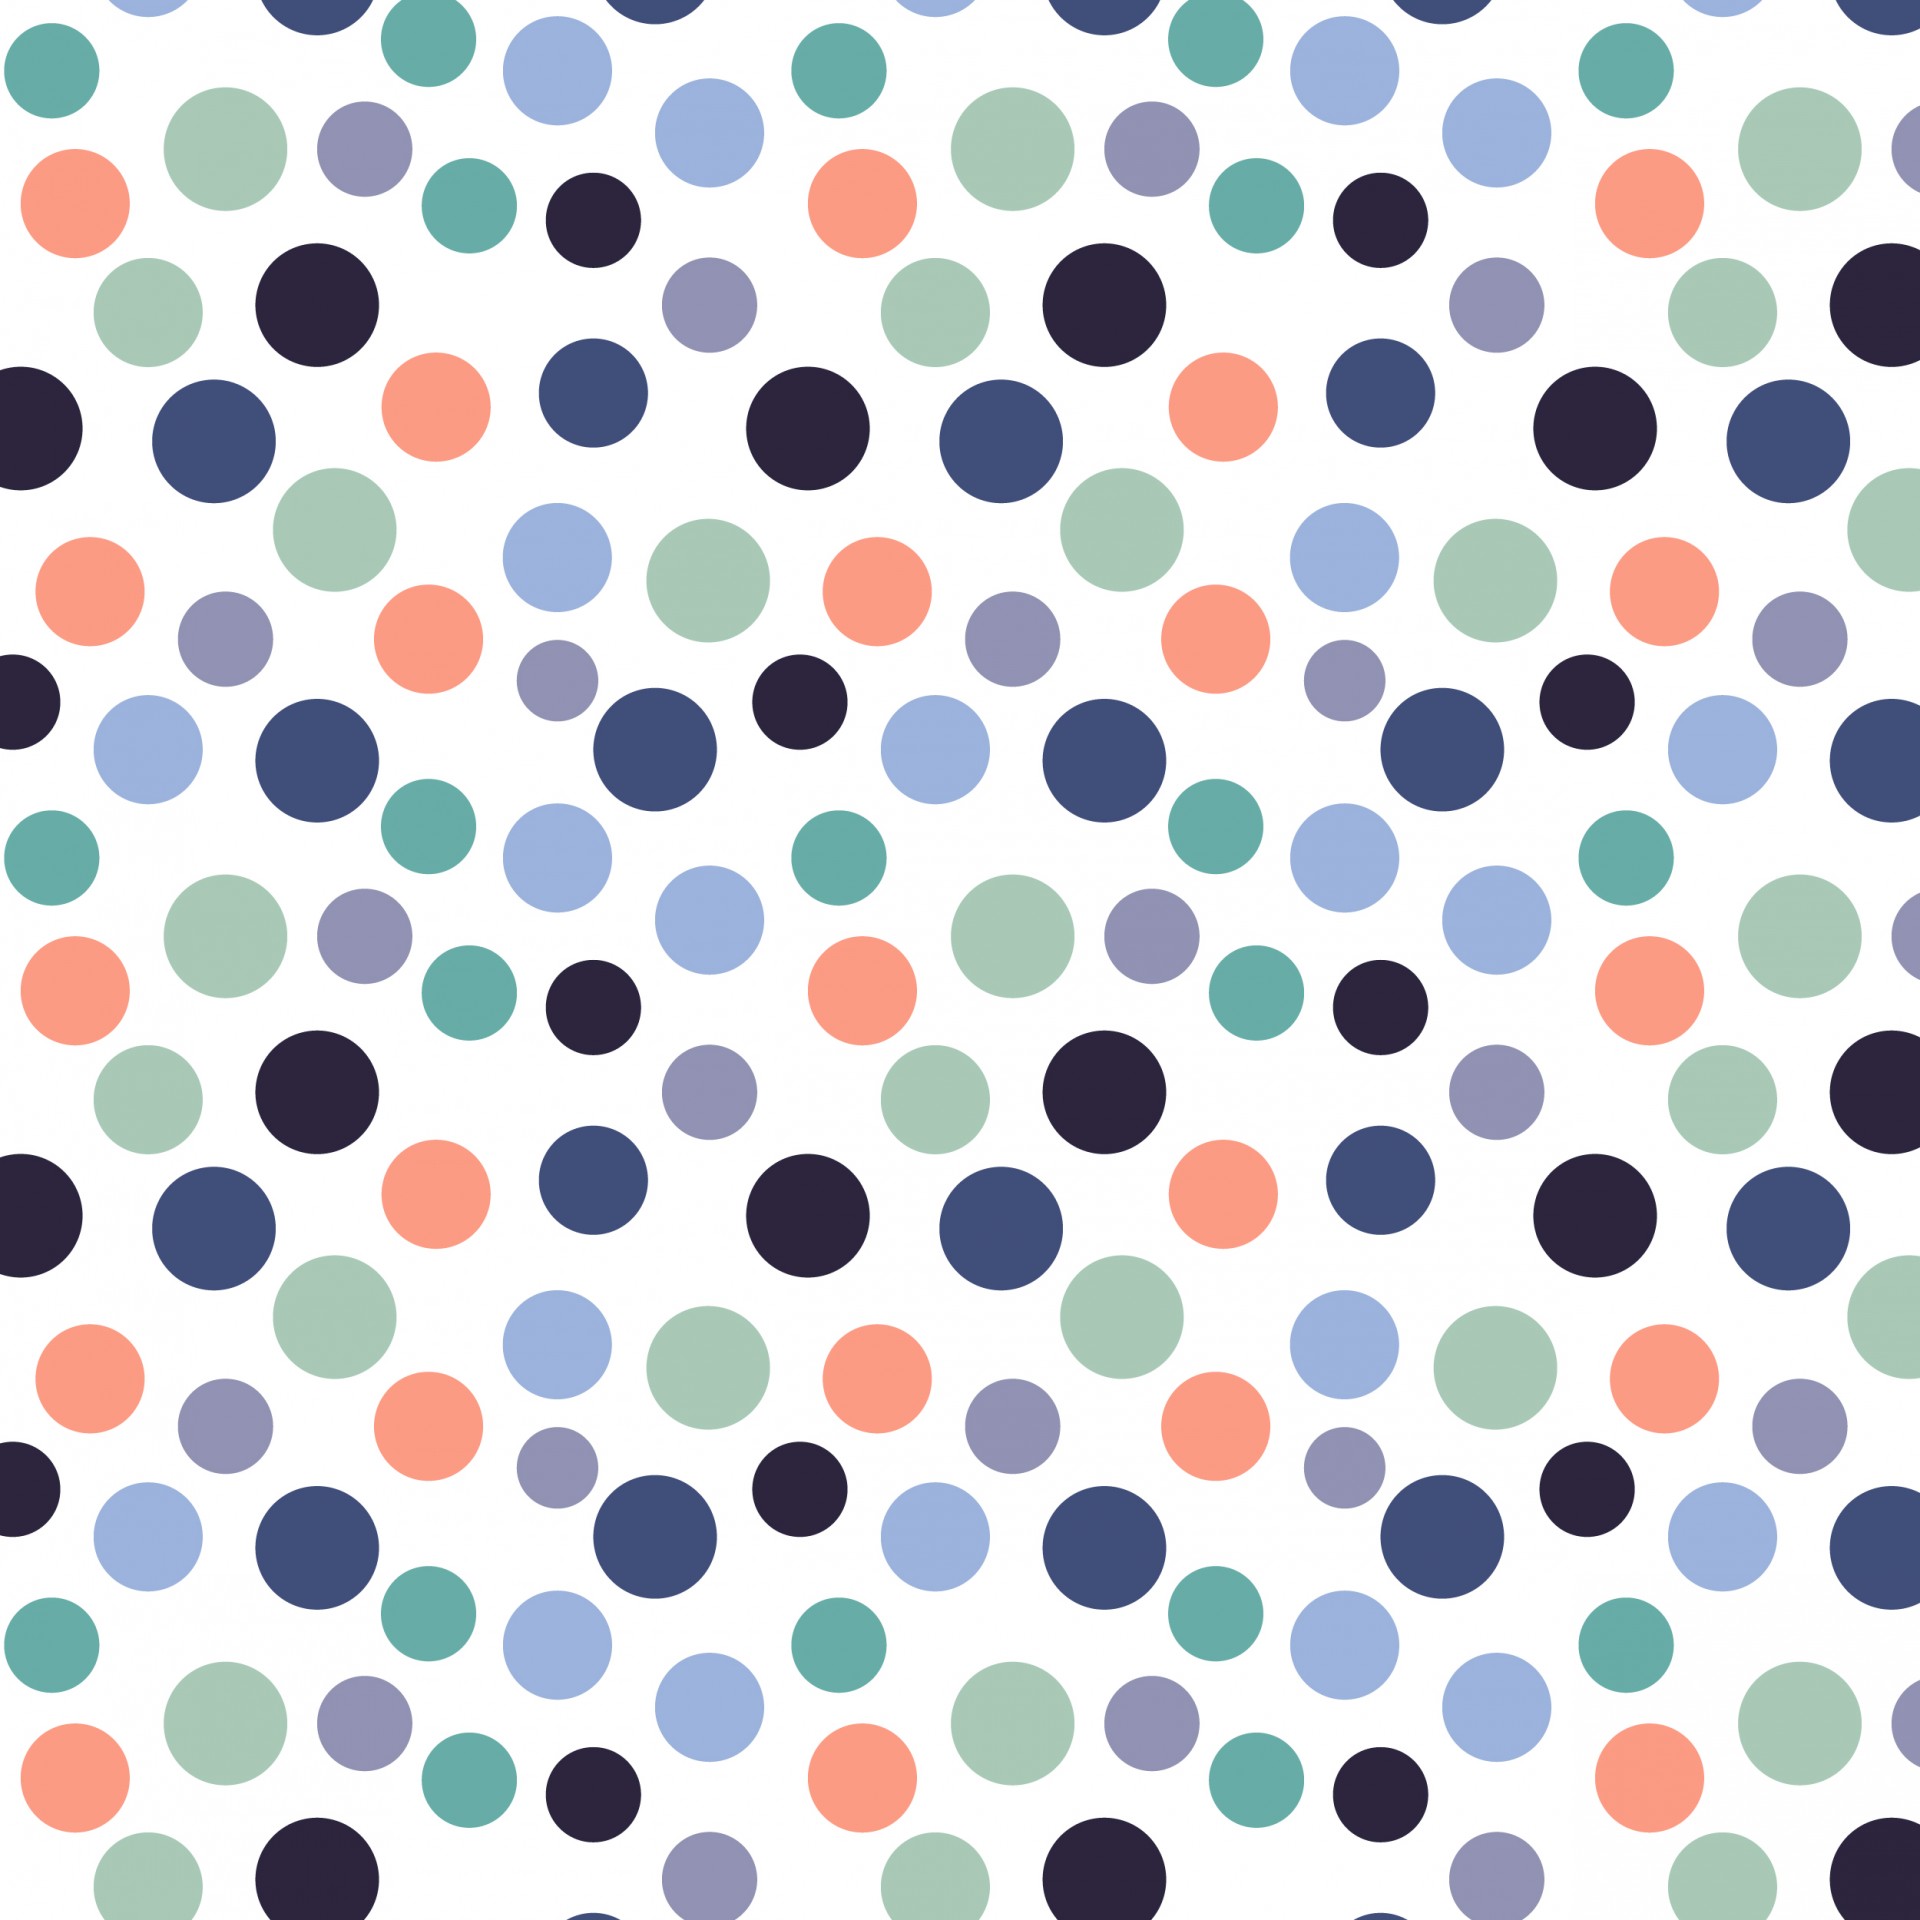 dotted pattern background free photo